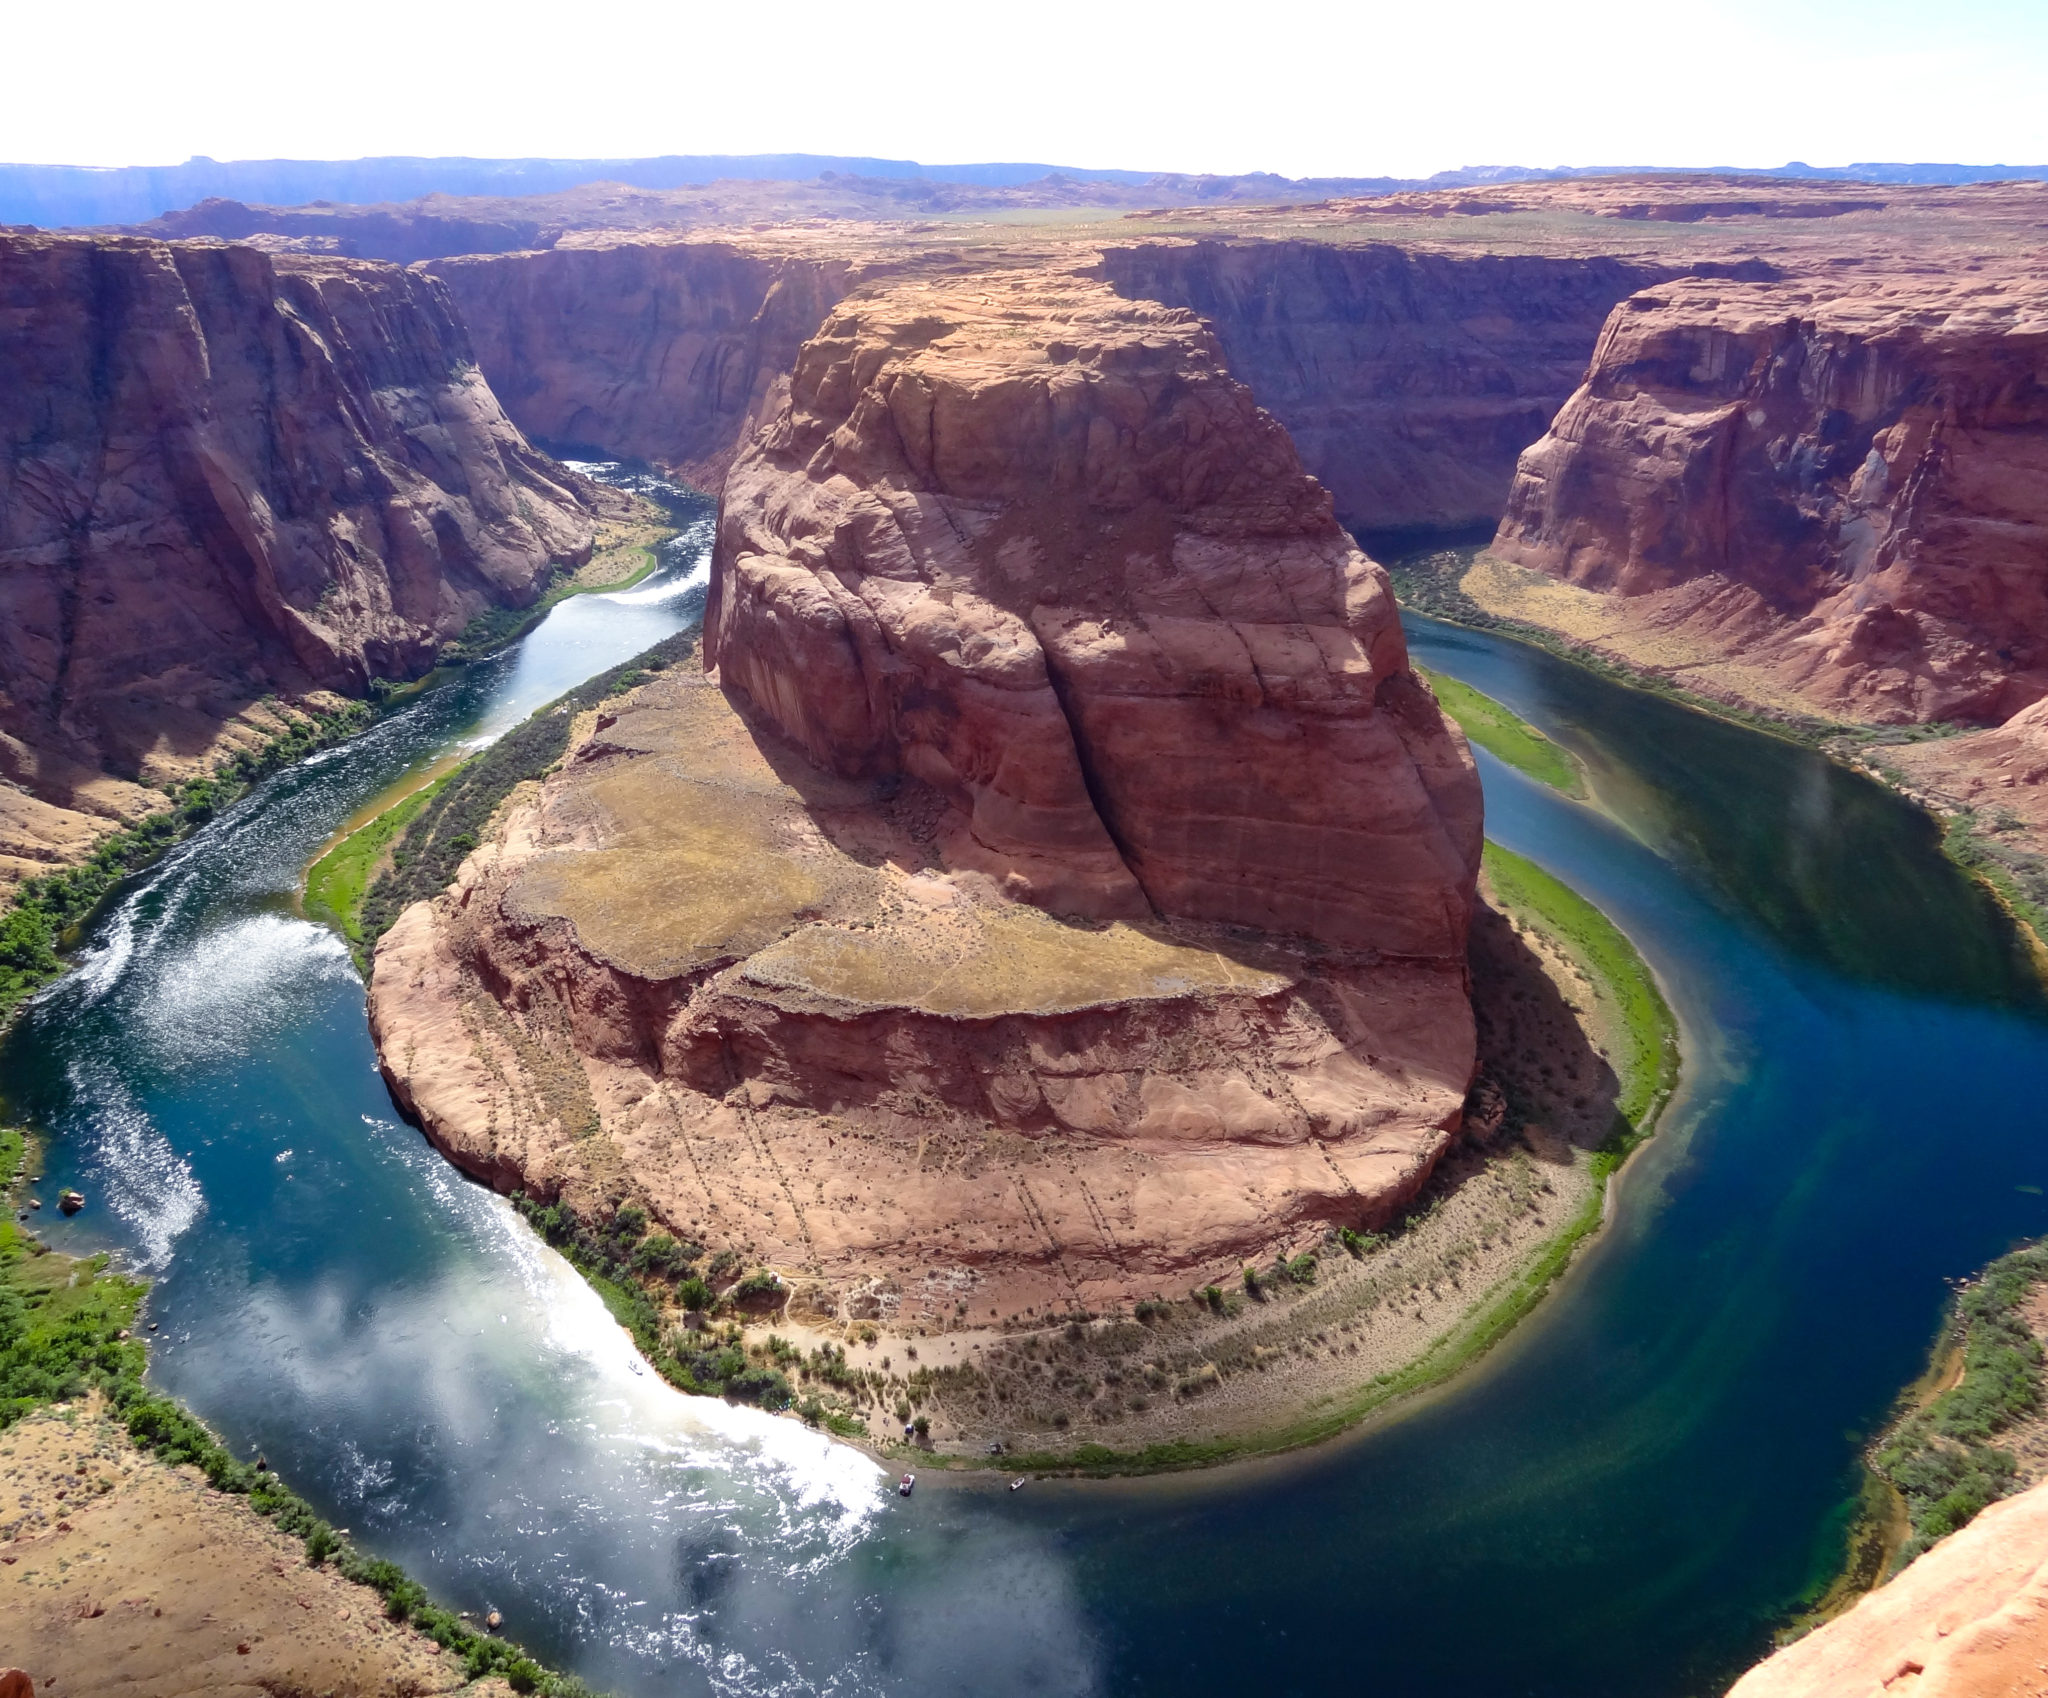 The iconic view of Horseshoe Bend looks even more amazing in person. The thing that isn't pictured, however, is all of the crazy people hanging off of a cliff for an Instagram shot. Super scary!